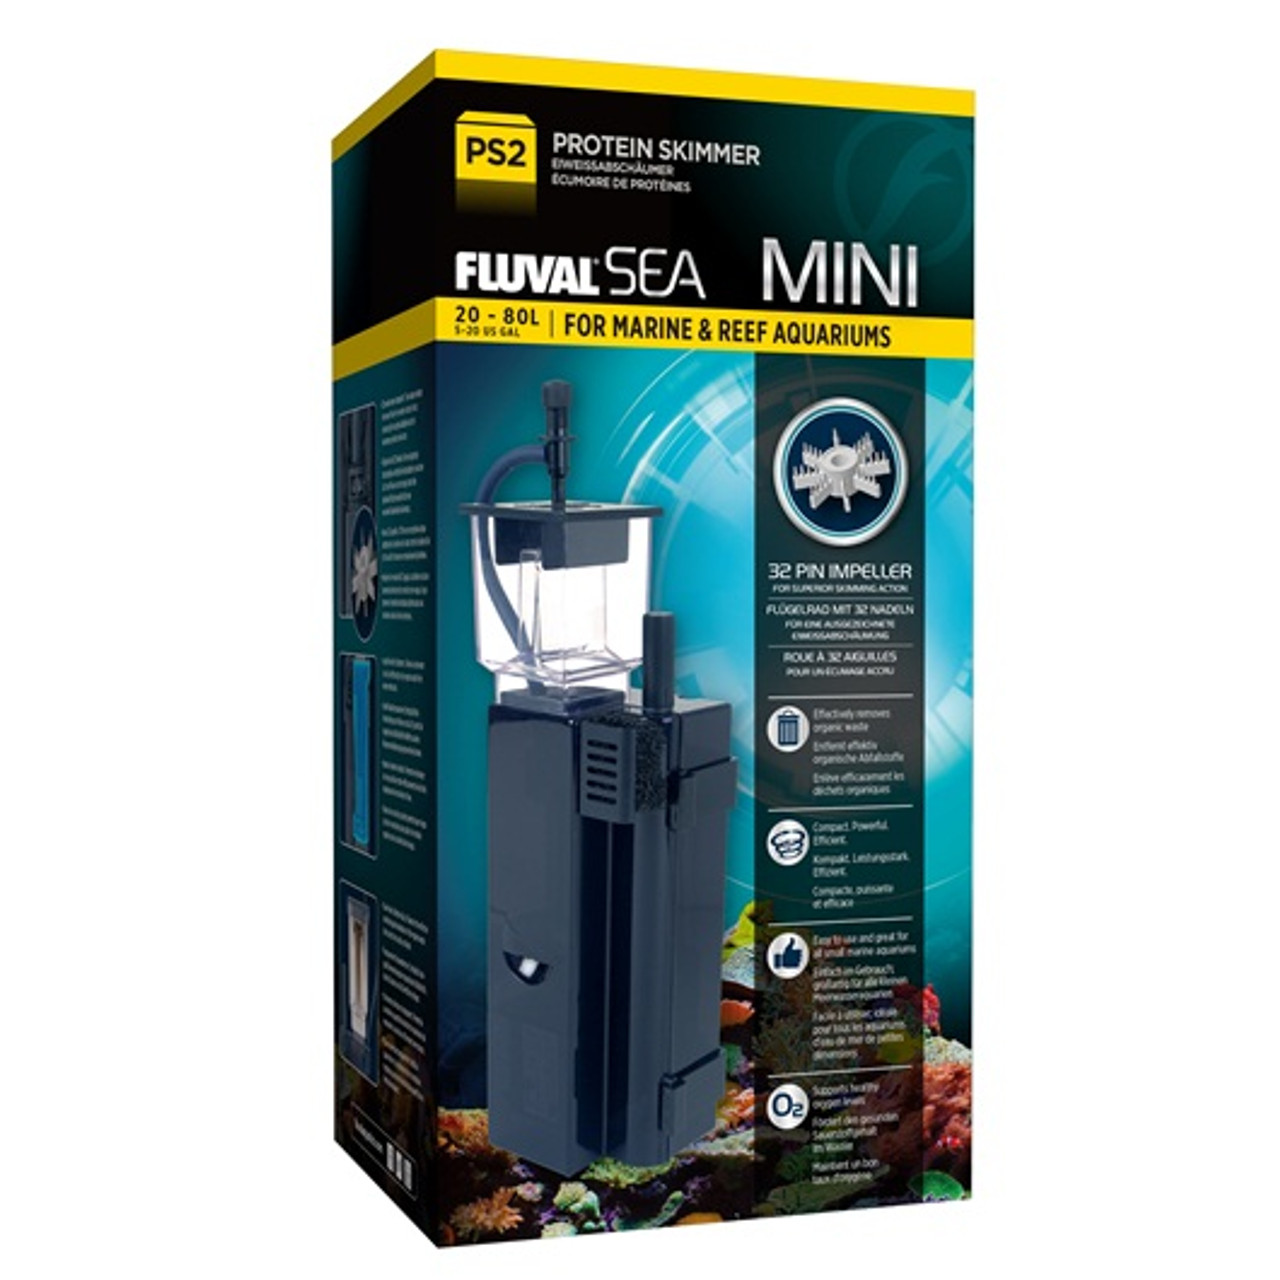 Fluval Sea PS2 Mini Protein Skimmer (up to 20 Gallons) - Fluval